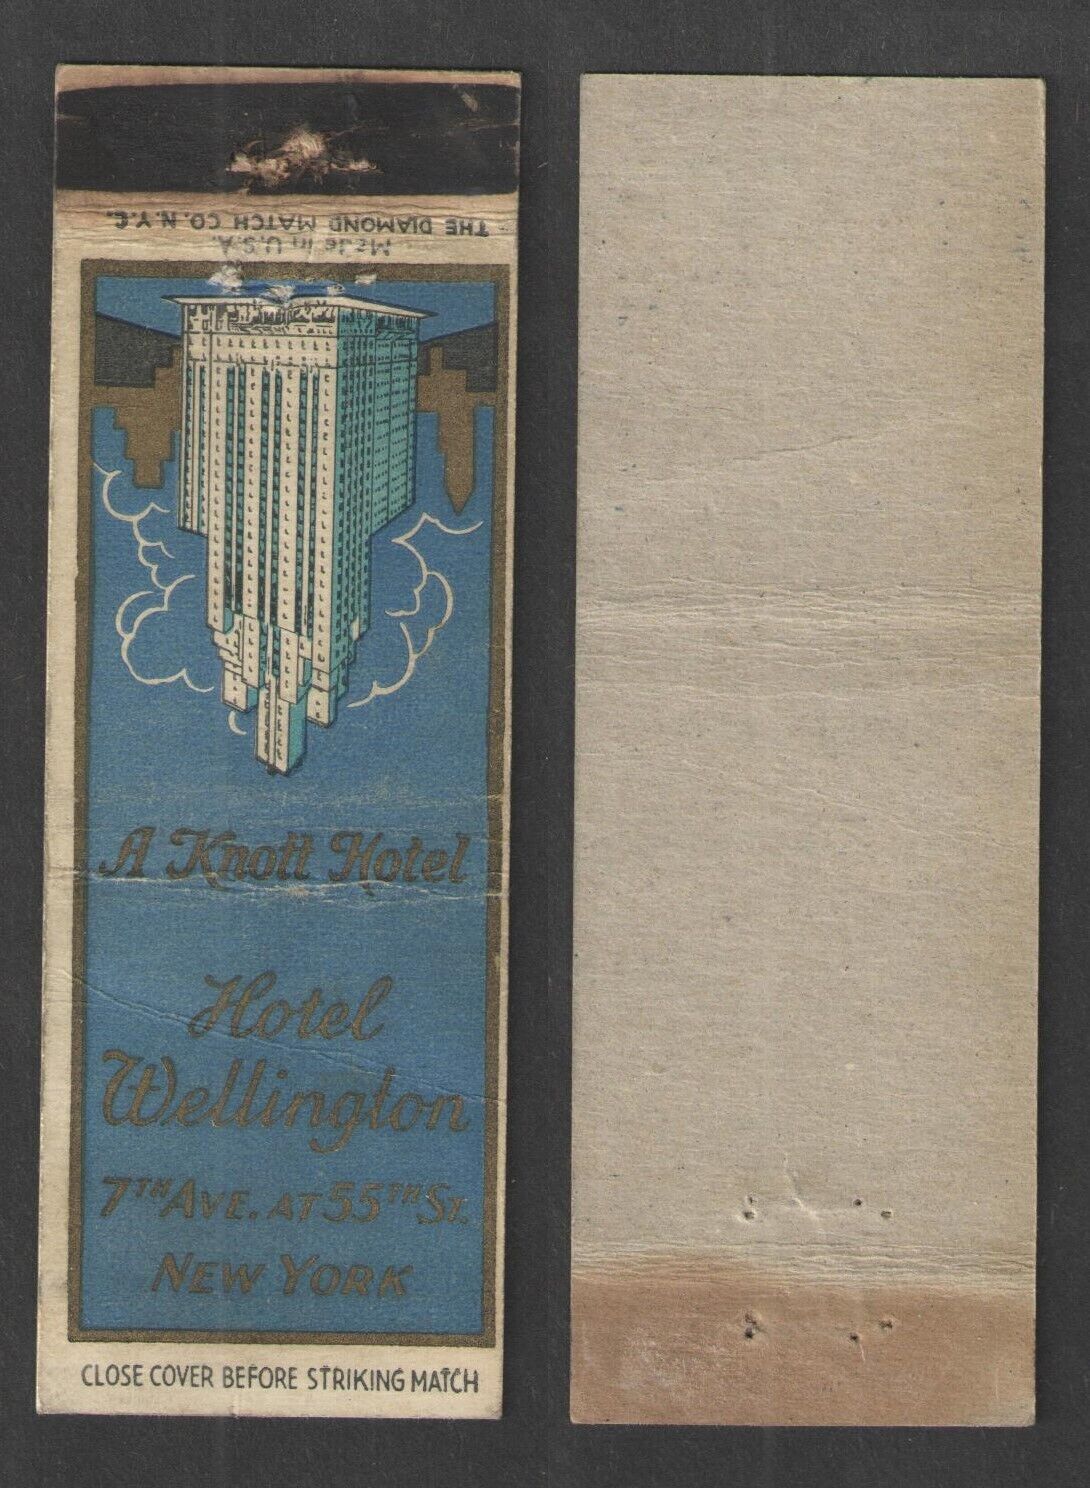 HOTEL WELLINGTON { A KNOLL HOTEL } NEW YORK NY MATCHBOOK COVER